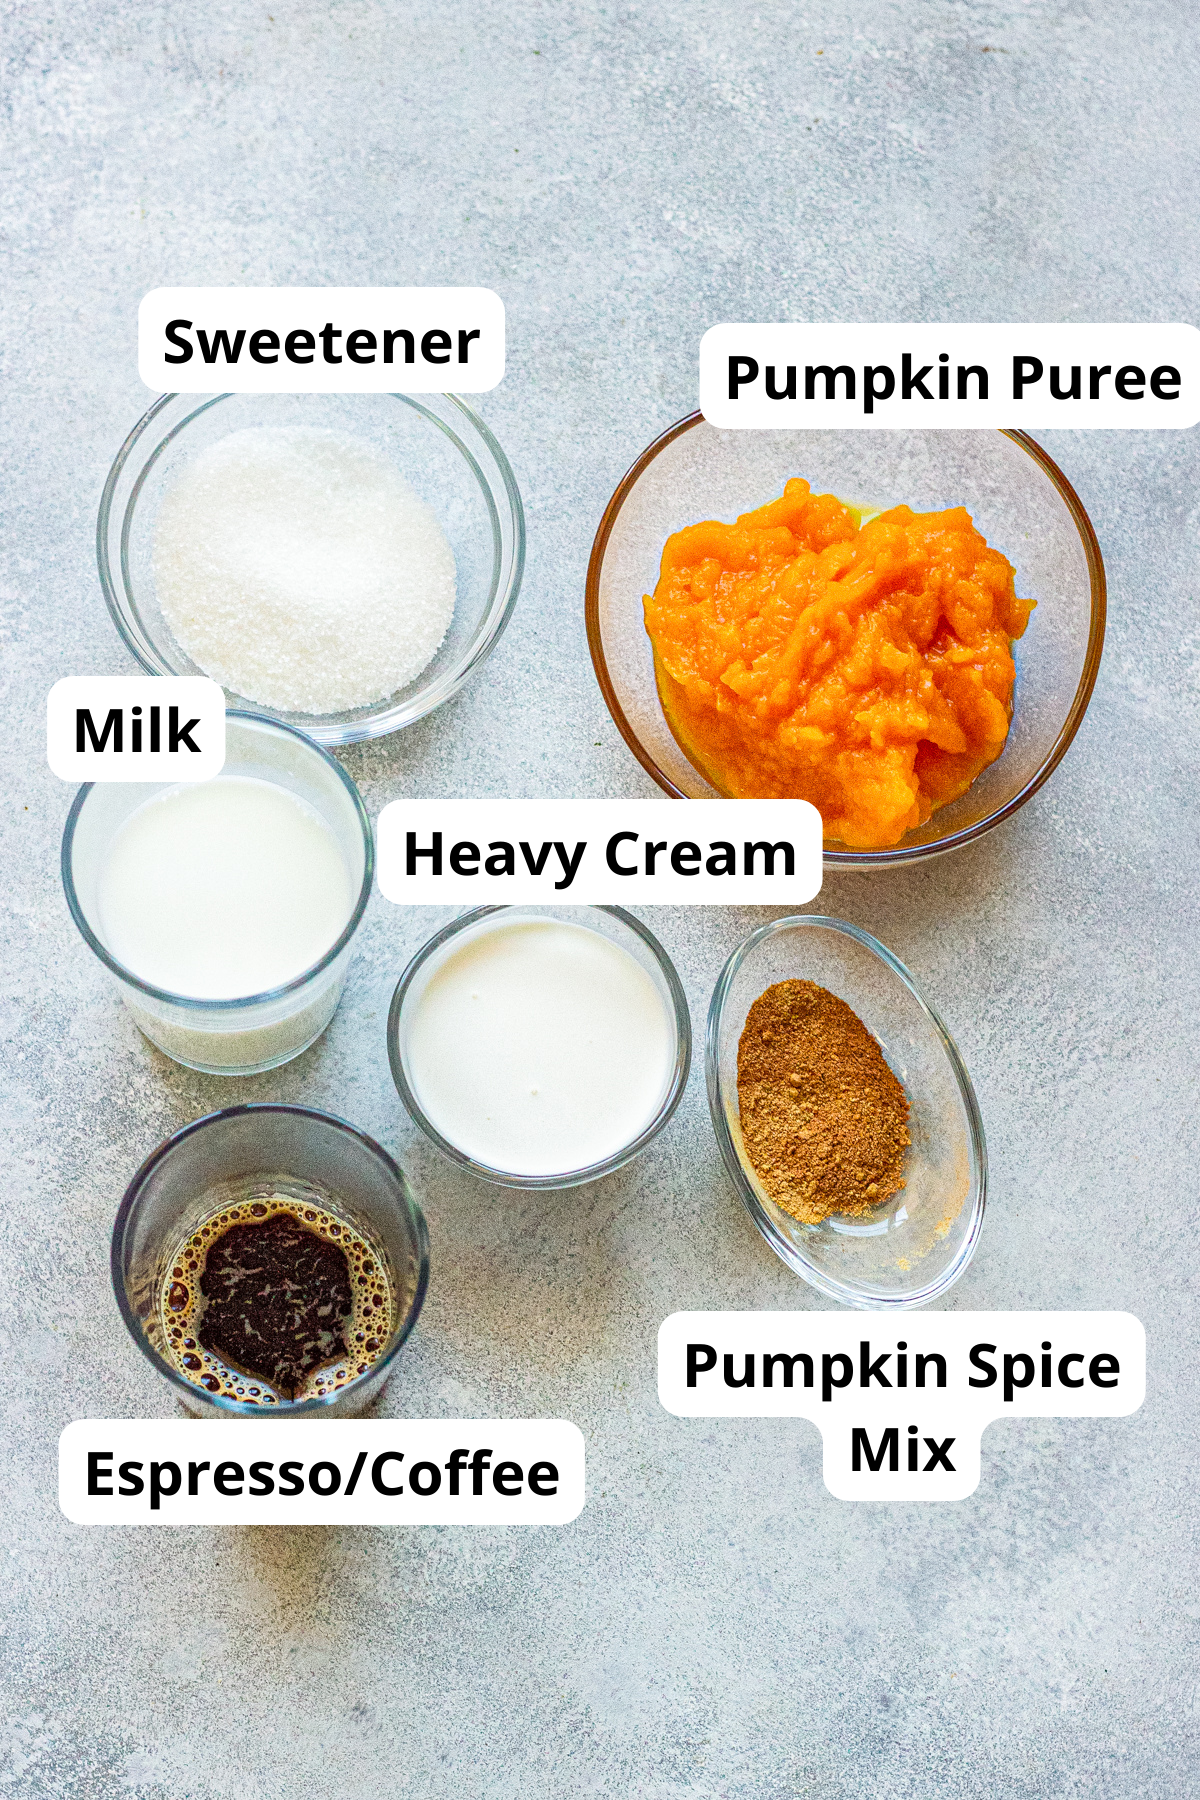 ingredients to make your own homemade pumpkin spice lattes